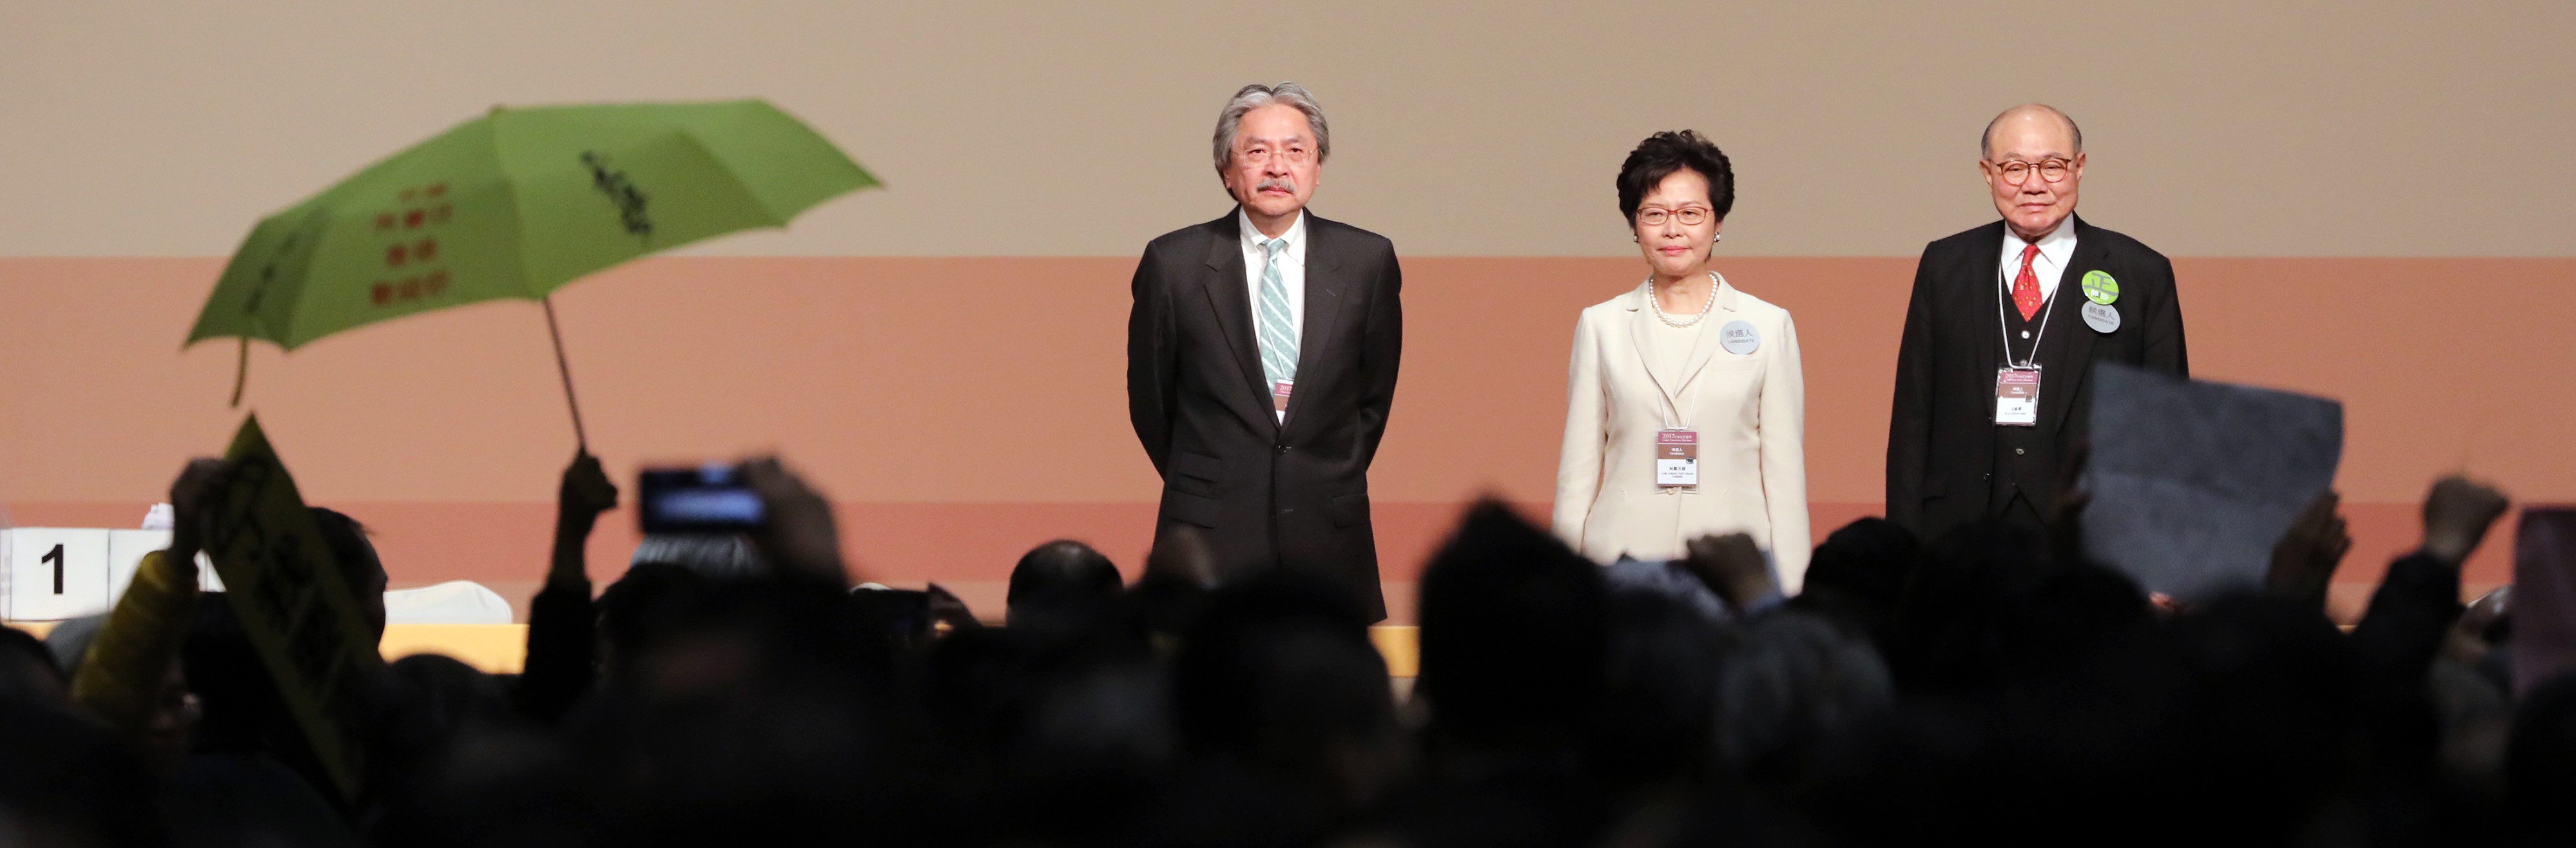 A protester raises a yellow umbrella as Chief Executive-designate Carrie Lam stands on stage with fellow candidates John Tsang and Woo Kwok-hing, March 2017 (Photo: Getty Images/Bloomberg)